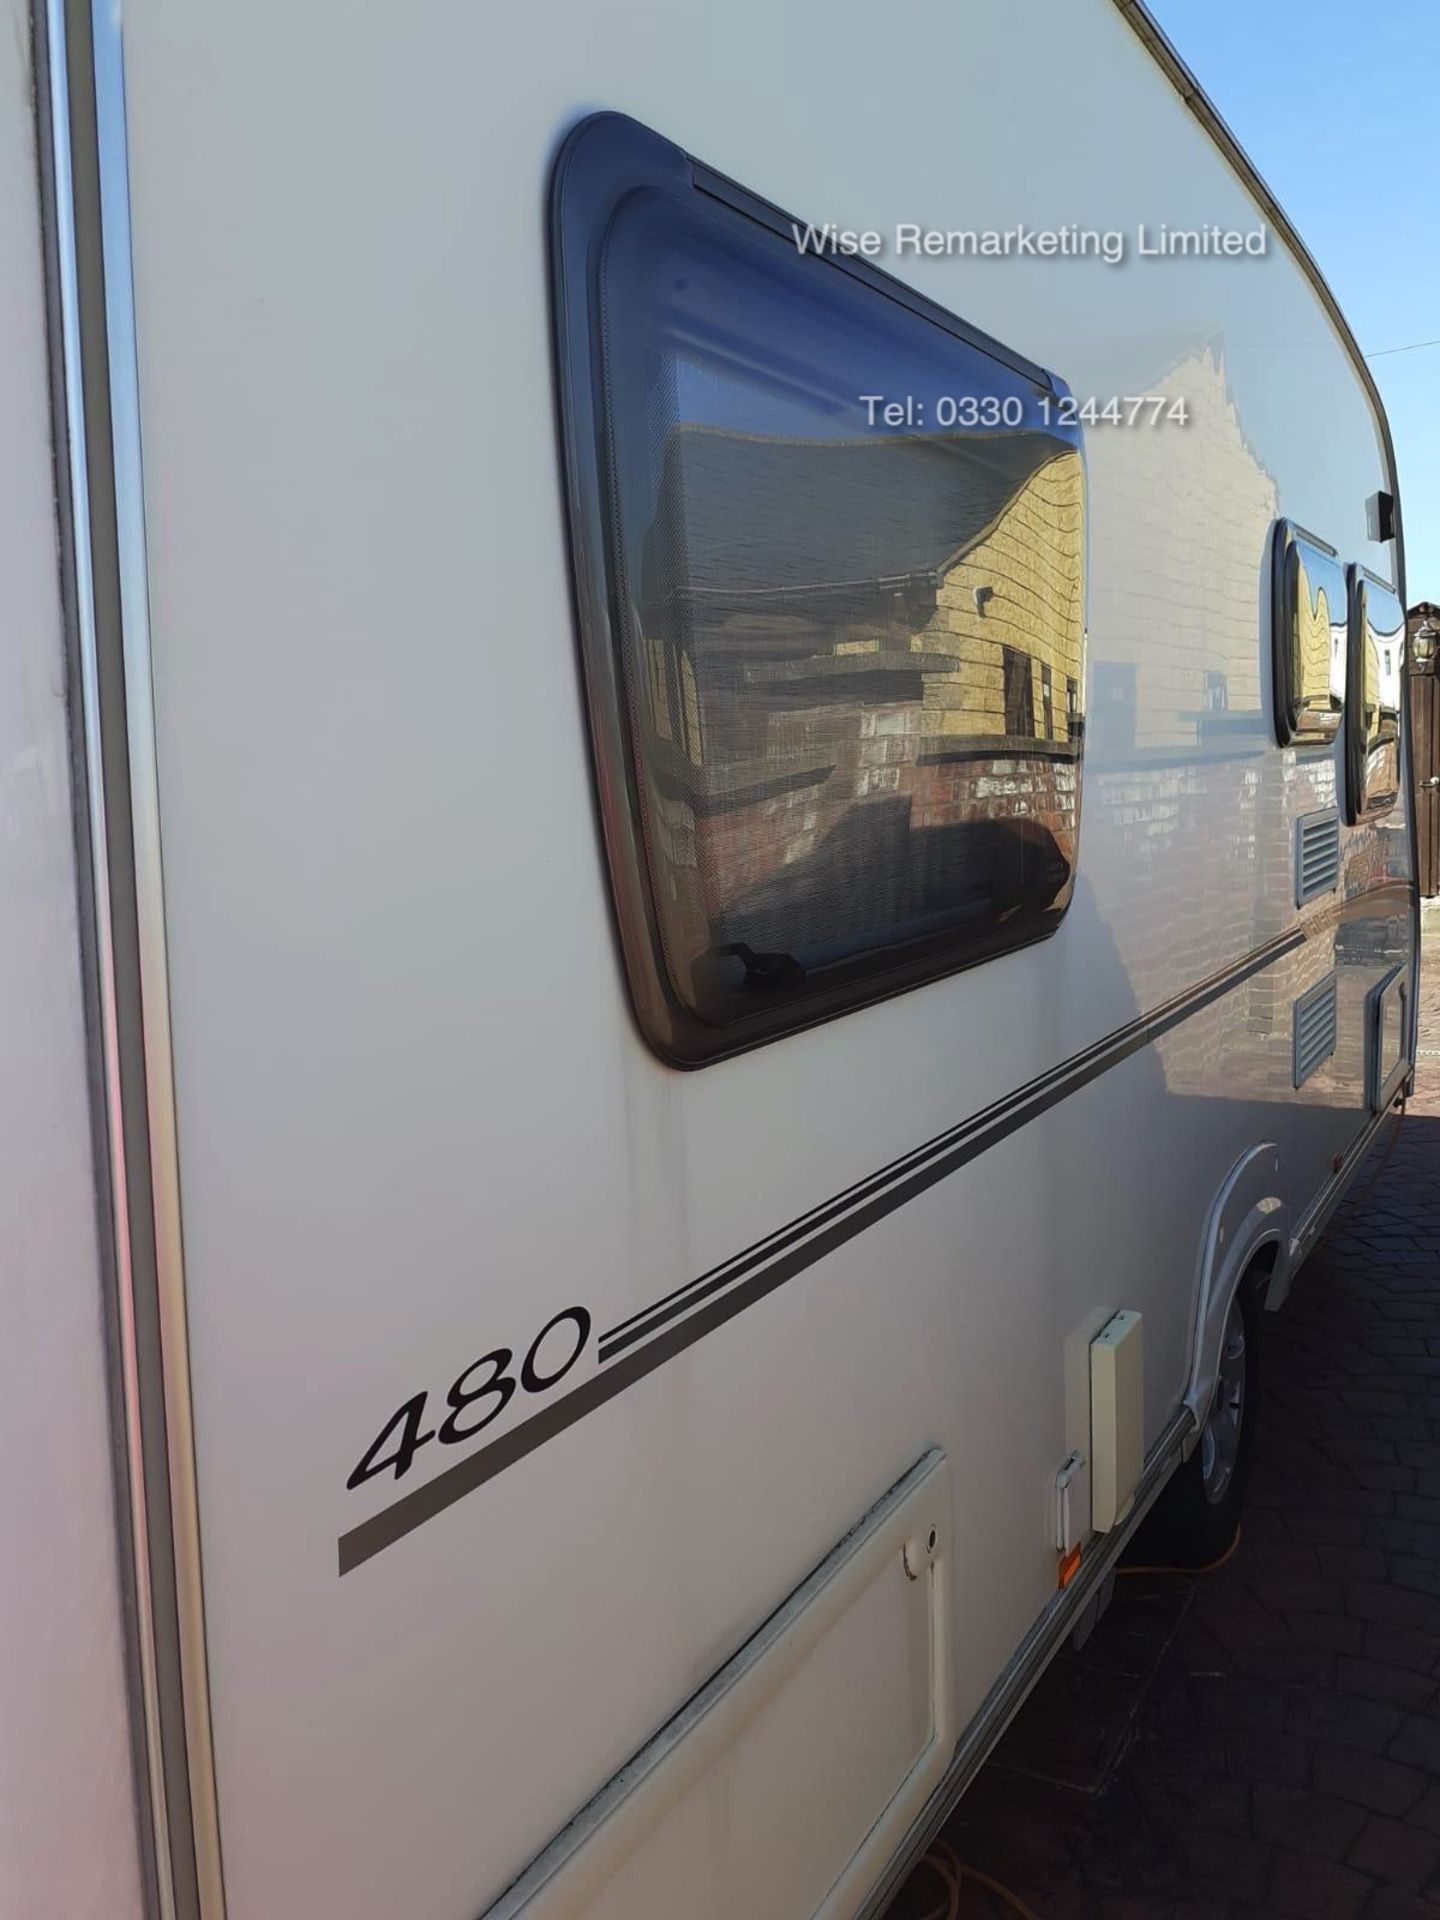 (RESERVE MET) Swift Abbey Freestyle 480 (4 Berth) Caravan - 2008 Model - 1 Former Keeper From New - Image 24 of 32